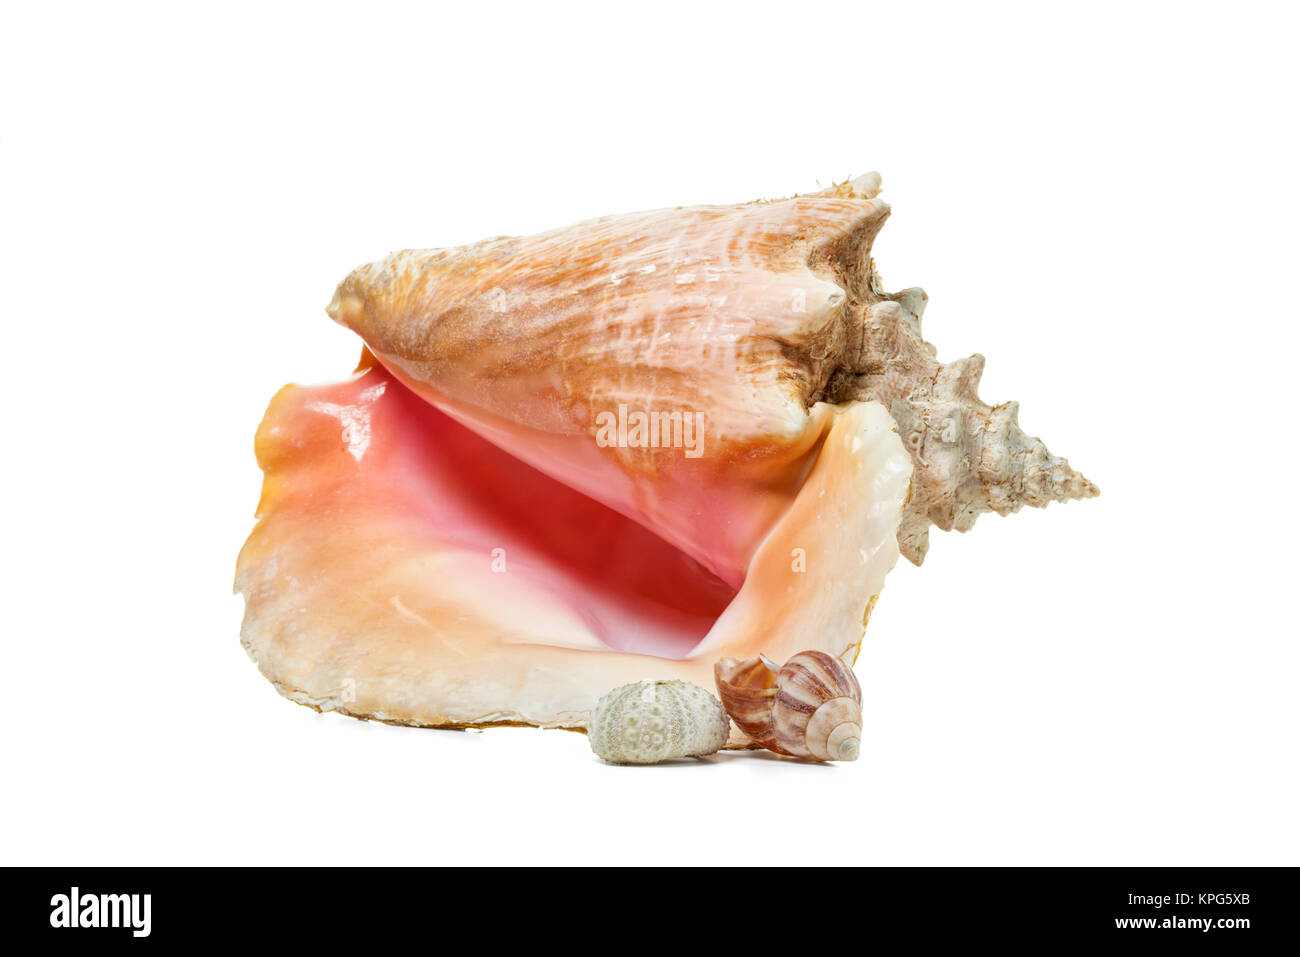 Queen conch, sea snail and fossil sea urchin skeleton isolated on white Stock Photo